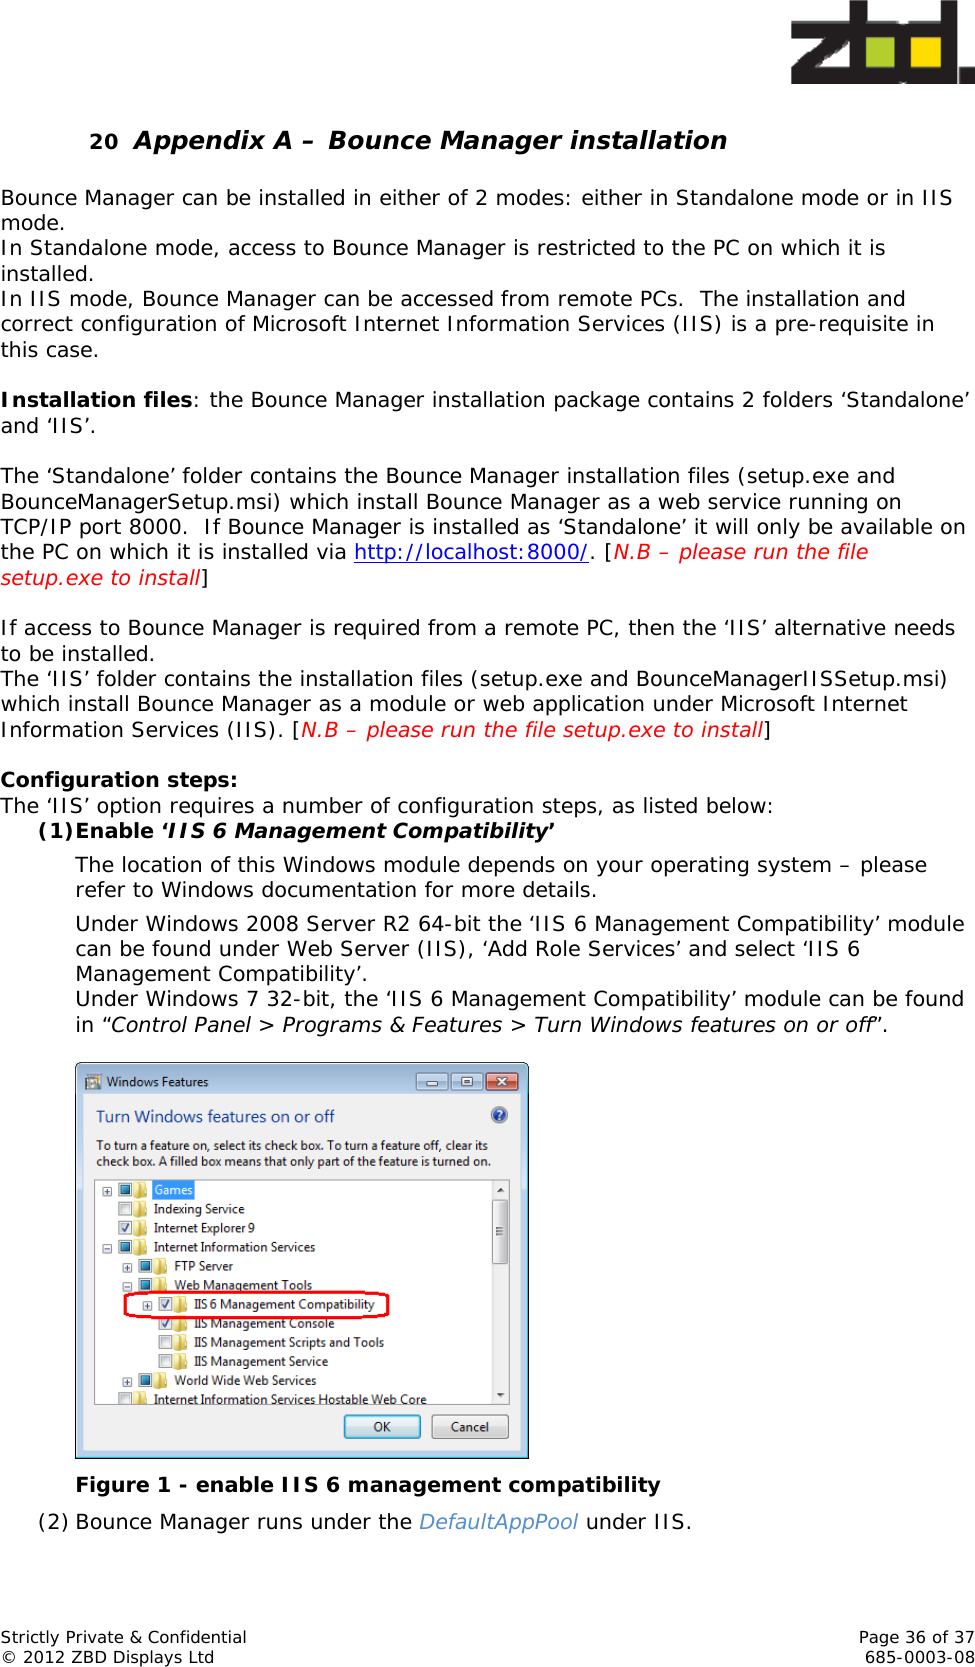  Strictly Private &amp; Confidential    Page 36 of 37 © 2012 ZBD Displays Ltd     685-0003-08 20 Appendix A – Bounce Manager installation  Bounce Manager can be installed in either of 2 modes: either in Standalone mode or in IIS mode. In Standalone mode, access to Bounce Manager is restricted to the PC on which it is installed. In IIS mode, Bounce Manager can be accessed from remote PCs.  The installation and correct configuration of Microsoft Internet Information Services (IIS) is a pre-requisite in this case.   Installation files: the Bounce Manager installation package contains 2 folders ‘Standalone’ and ‘IIS’.  The ‘Standalone’ folder contains the Bounce Manager installation files (setup.exe and BounceManagerSetup.msi) which install Bounce Manager as a web service running on TCP/IP port 8000.  If Bounce Manager is installed as ‘Standalone’ it will only be available on the PC on which it is installed via http://localhost:8000/. [N.B – please run the file setup.exe to install]  If access to Bounce Manager is required from a remote PC, then the ‘IIS’ alternative needs to be installed. The ‘IIS’ folder contains the installation files (setup.exe and BounceManagerIISSetup.msi) which install Bounce Manager as a module or web application under Microsoft Internet Information Services (IIS). [N.B – please run the file setup.exe to install]  Configuration steps: The ‘IIS’ option requires a number of configuration steps, as listed below: (1)Enable ‘IIS 6 Management Compatibility’ The location of this Windows module depends on your operating system – please refer to Windows documentation for more details. Under Windows 2008 Server R2 64-bit the ‘IIS 6 Management Compatibility’ module can be found under Web Server (IIS), ‘Add Role Services’ and select ‘IIS 6 Management Compatibility’. Under Windows 7 32-bit, the ‘IIS 6 Management Compatibility’ module can be found in “Control Panel &gt; Programs &amp; Features &gt; Turn Windows features on or off”.   Figure 1 - enable IIS 6 management compatibility (2) Bounce Manager runs under the DefaultAppPool under IIS. 